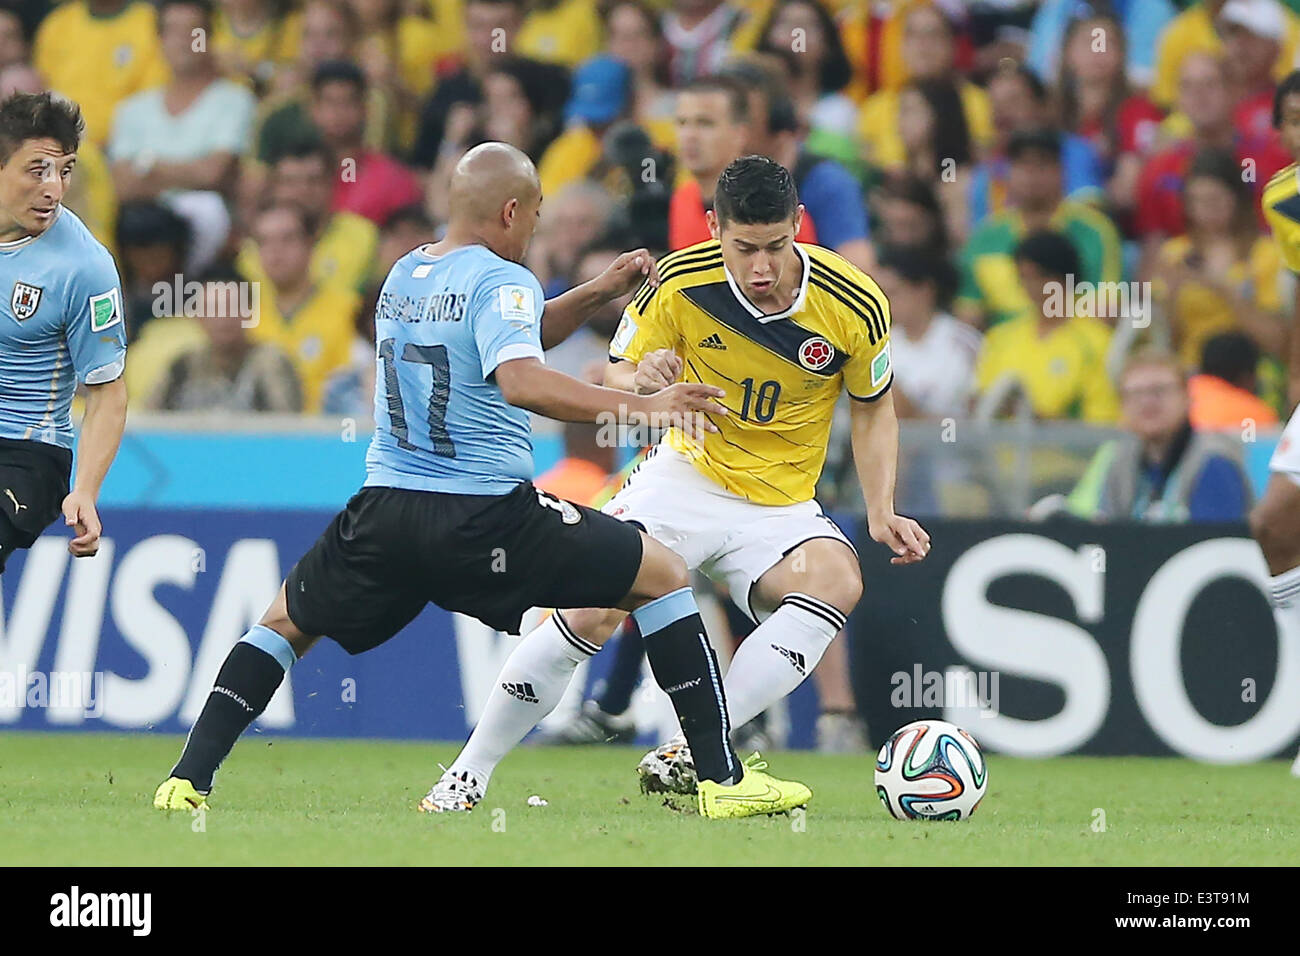 Rio De Janeiro, Brazil. 28th June, 2014. Colombia's James Rodriguez vies with Uruguay's Egidio Arevalo Rios during a Round of 16 match between Colombia and Uruguay of 2014 FIFA World Cup at the Estadio do Maracana Stadium in Rio de Janeiro, Brazil, on June 28, 2014. Colombia won 2-0 over Uruguay on Saturday. Credit:  Xu Zijian/Xinhua/Alamy Live News Stock Photo